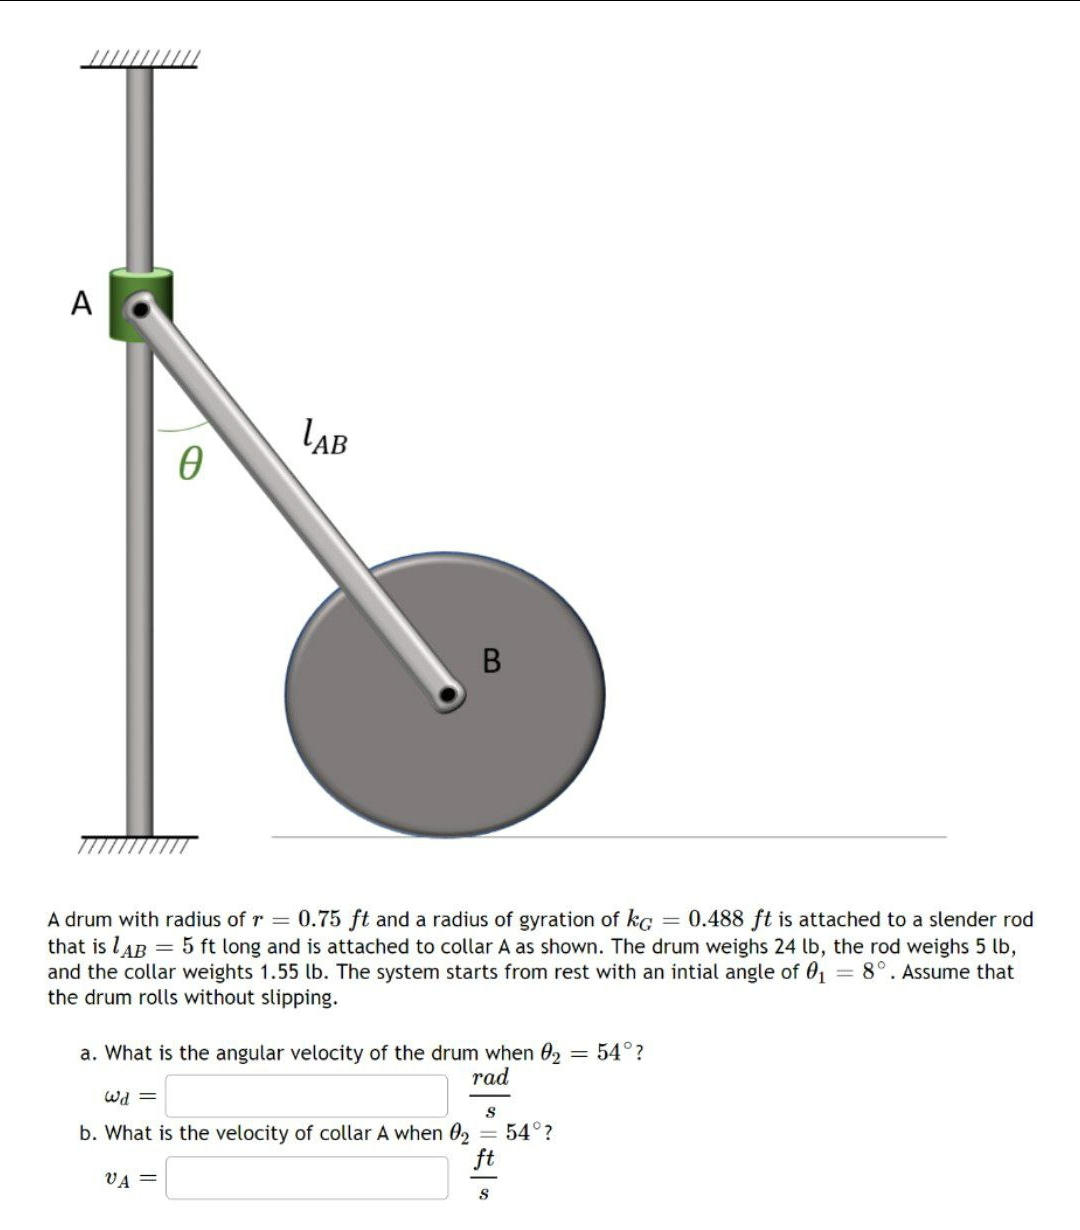 A
LAB
A drum with radius of r = 0.75 ft and a radius of gyration of kc = 0.488 ft is attached to a slender rod
that is lAB = 5 ft long and is attached to collar A as shown. The drum weighs 24 lb, the rod weighs 5 lb,
and the collar weights 1.55 lb. The system starts from rest with an intial angle of 01 8°. Assume that
the drum rolls without slipping.
= 54°?
a. What is the angular velocity of the drum when 02
rad
= Pm
b. What is the velocity of collar A when 02
= 54°?
ft
VA =
